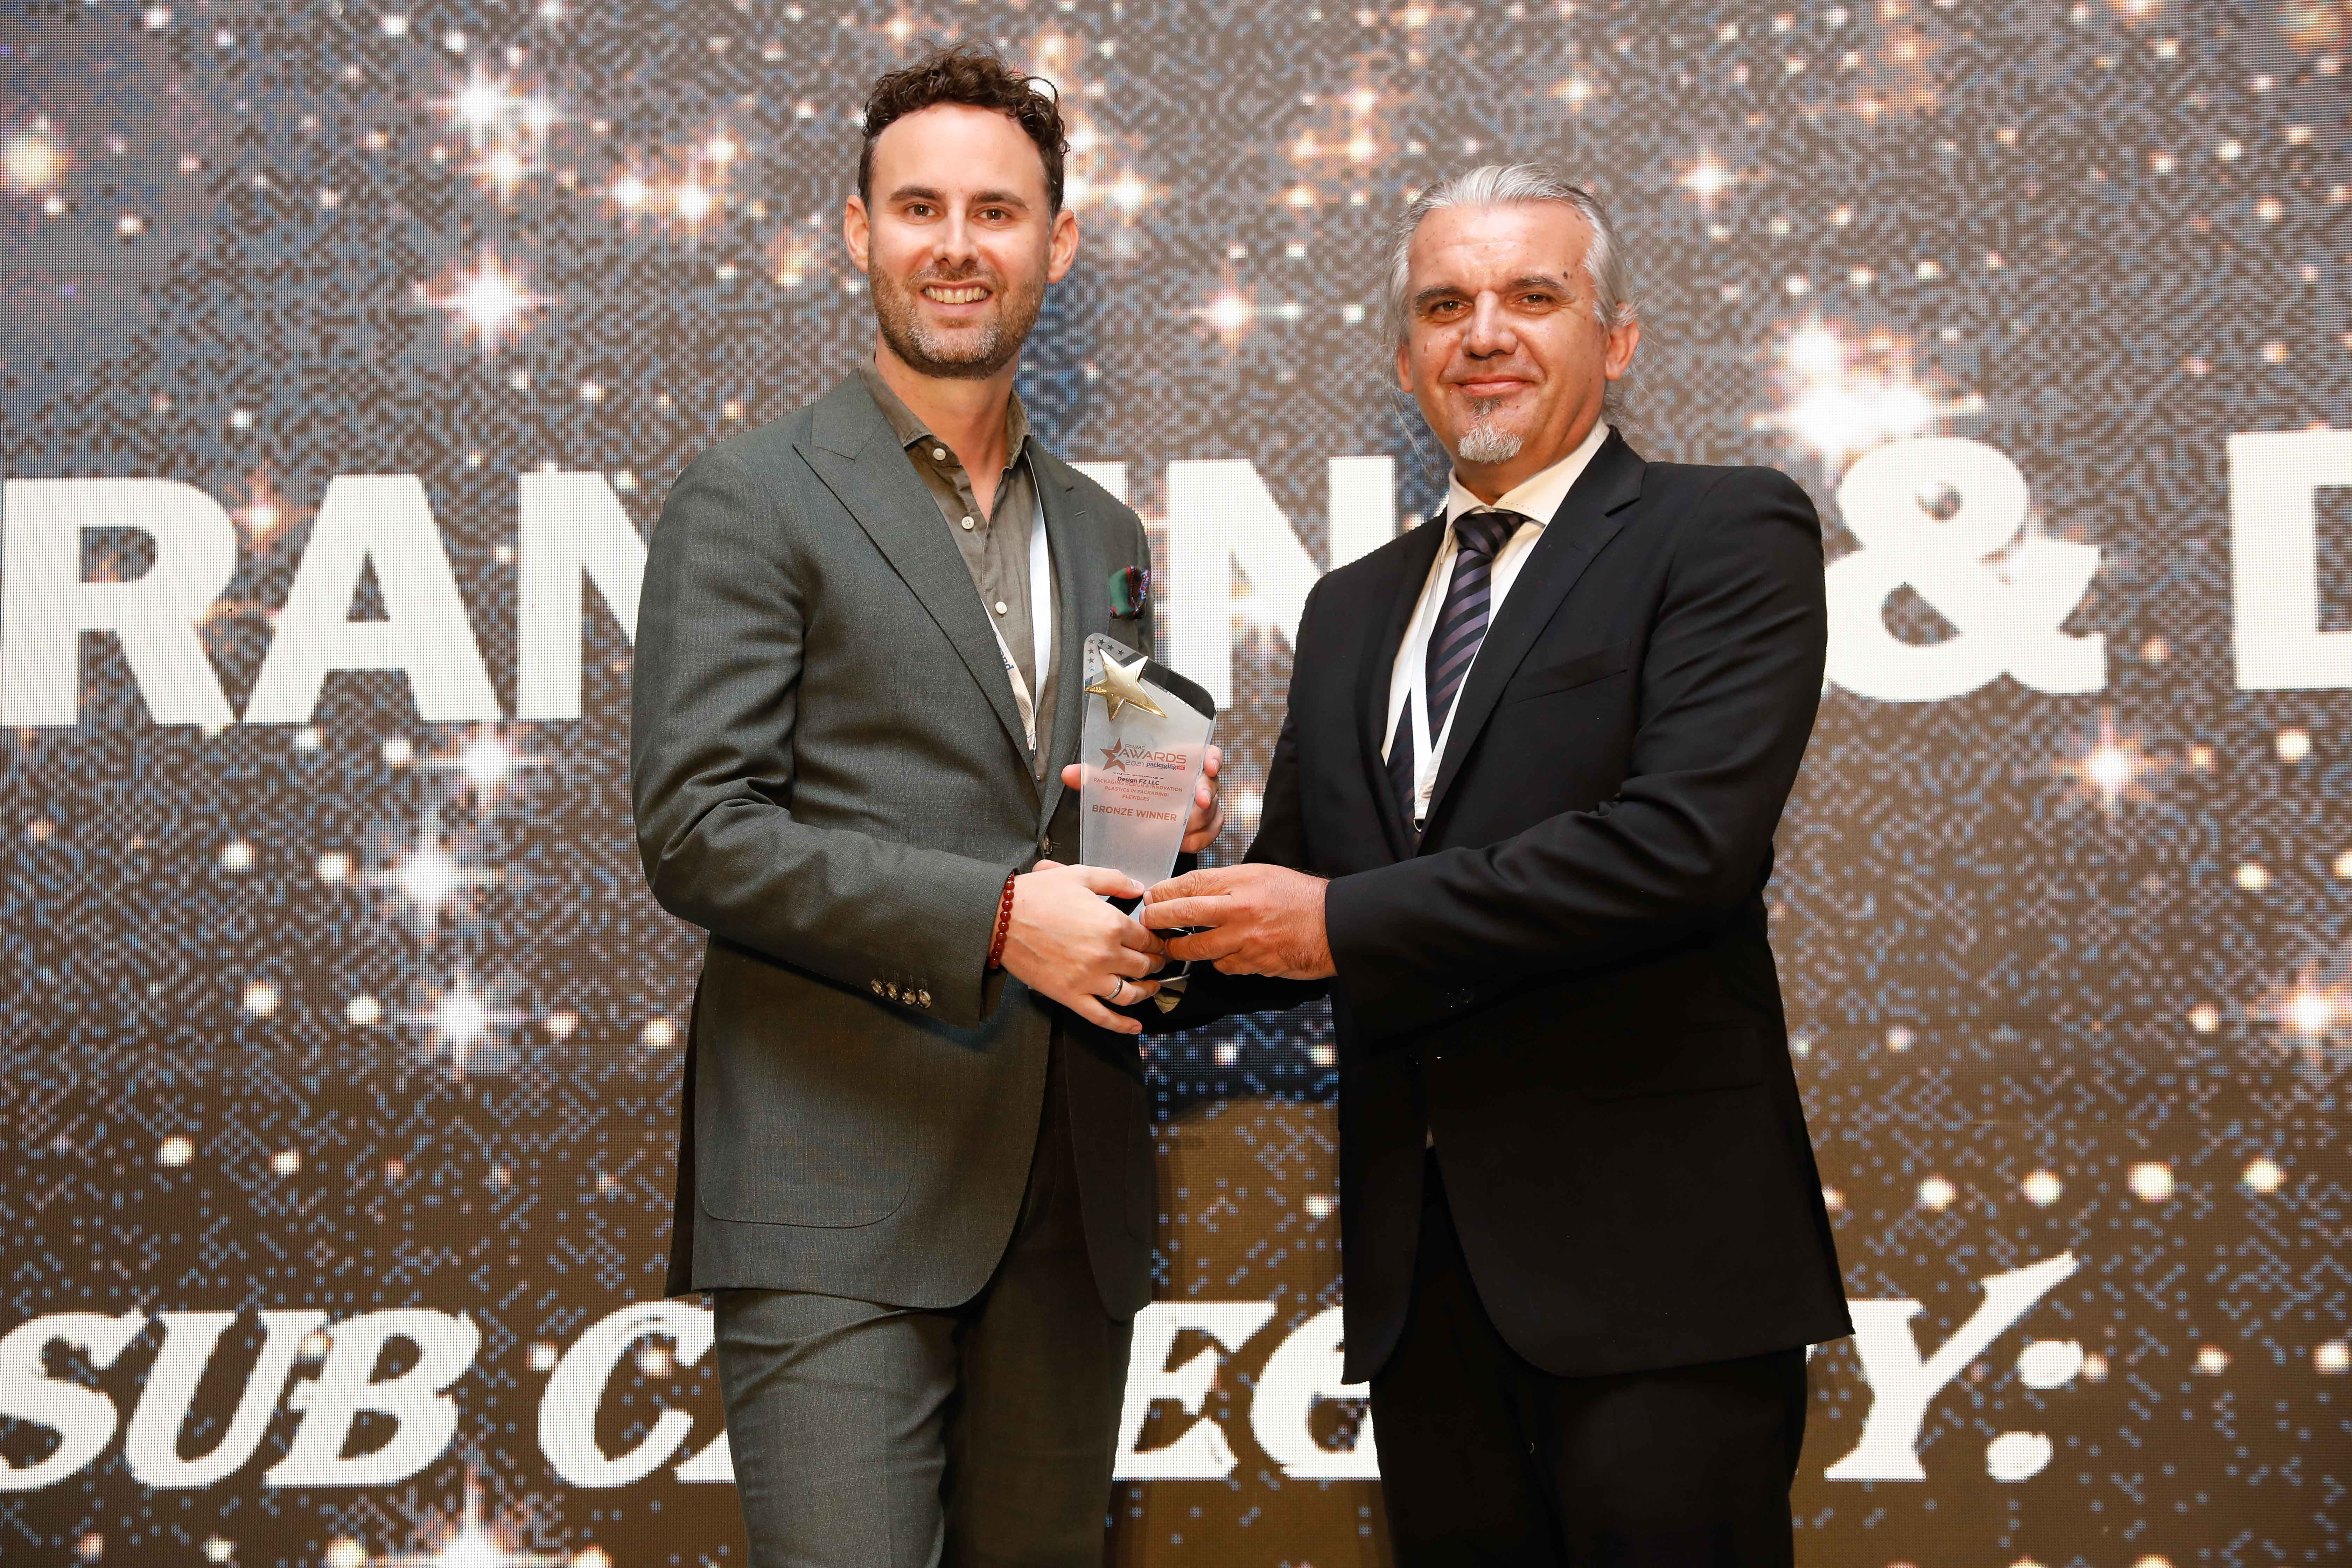 Skyne wins at the Packaging MEA Awards